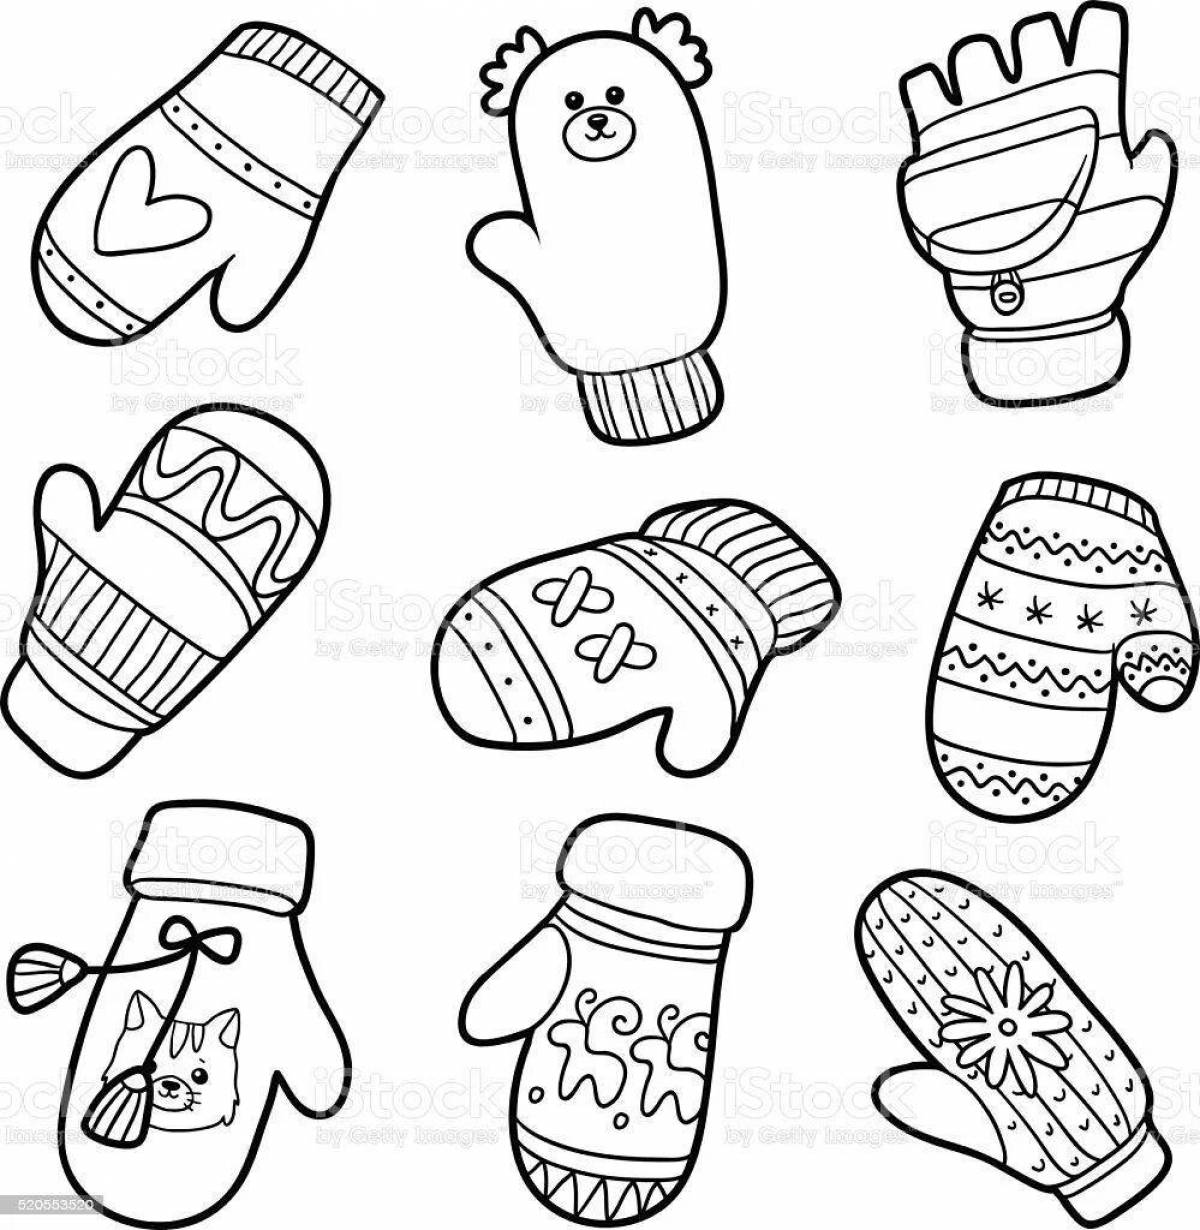 Shiny Mitten coloring book for kids